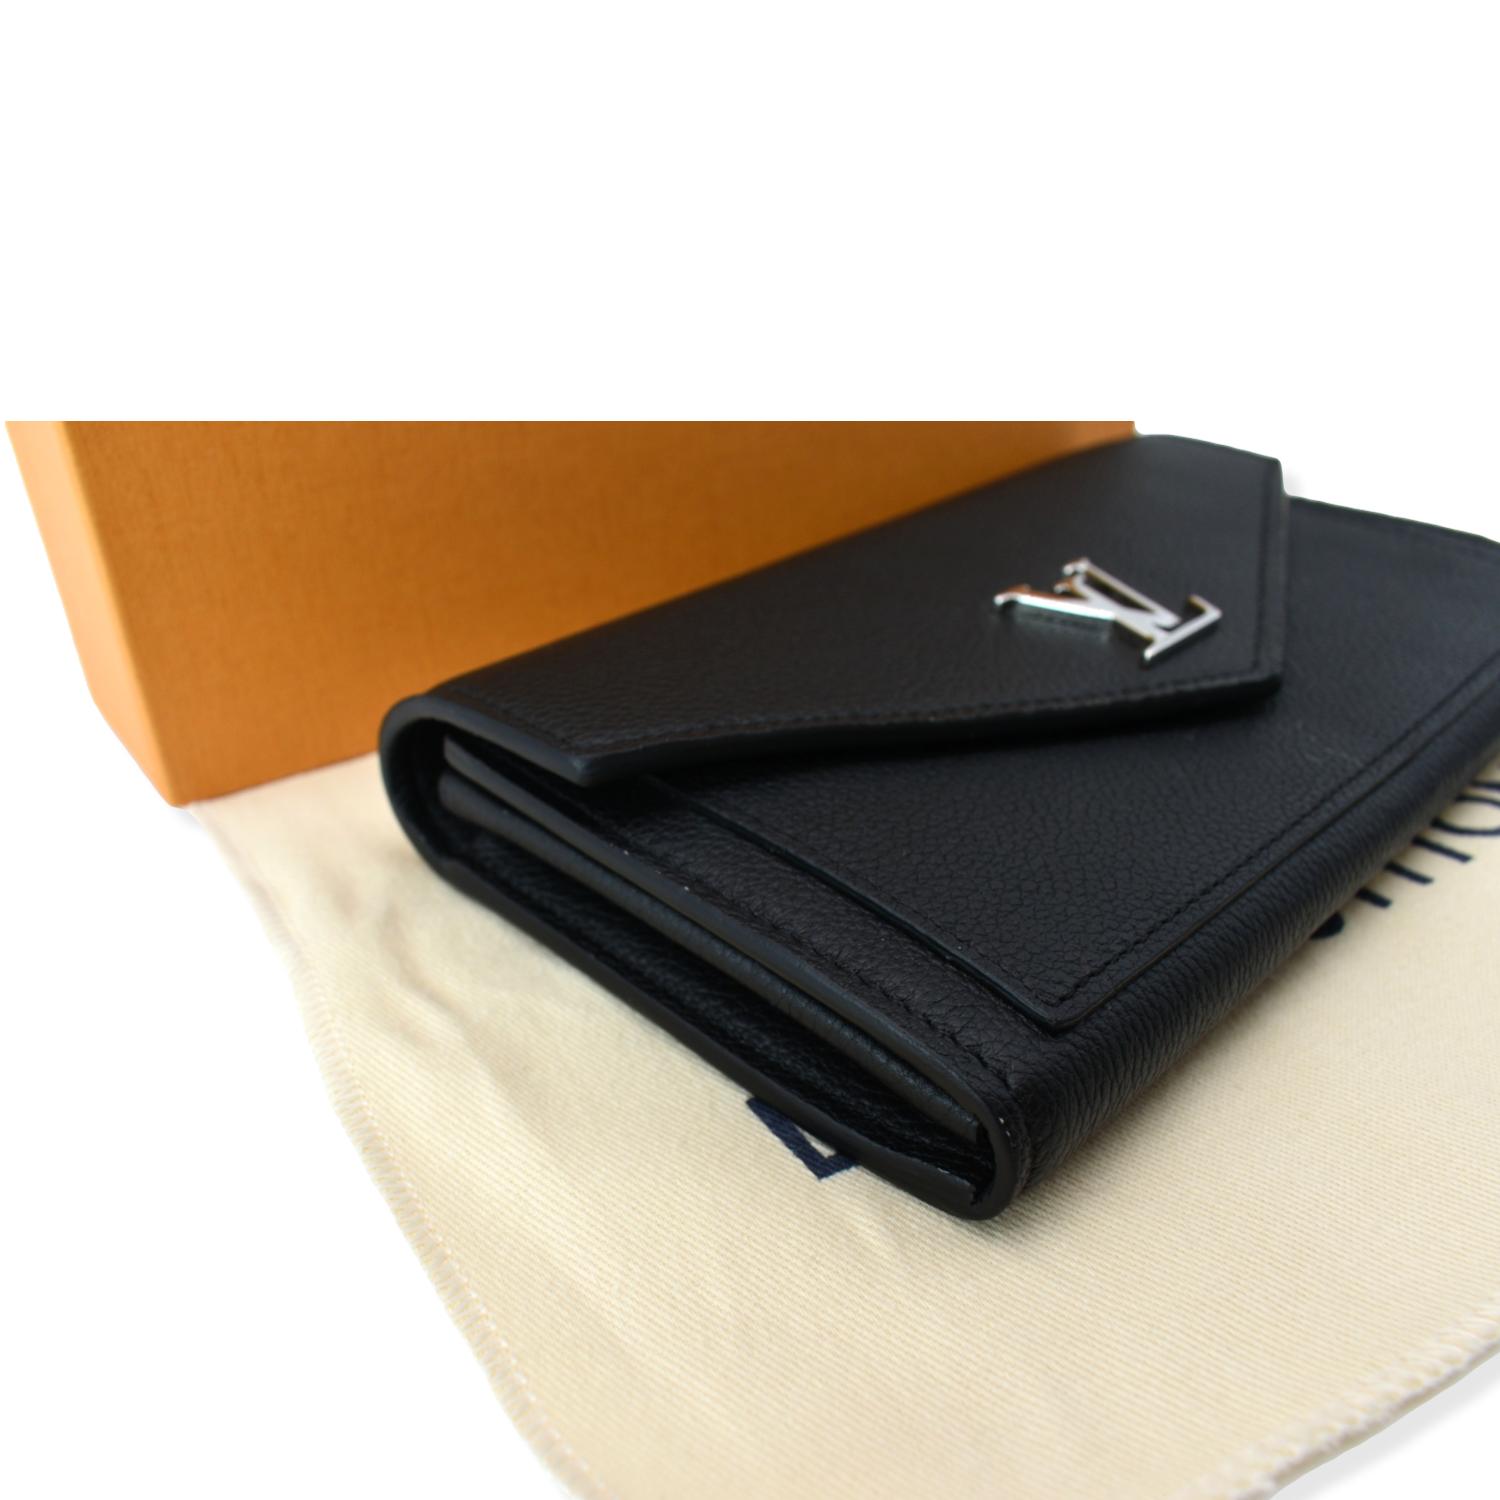 MyLockMe Compact Wallet Lockme Leather - Wallets and Small Leather Goods